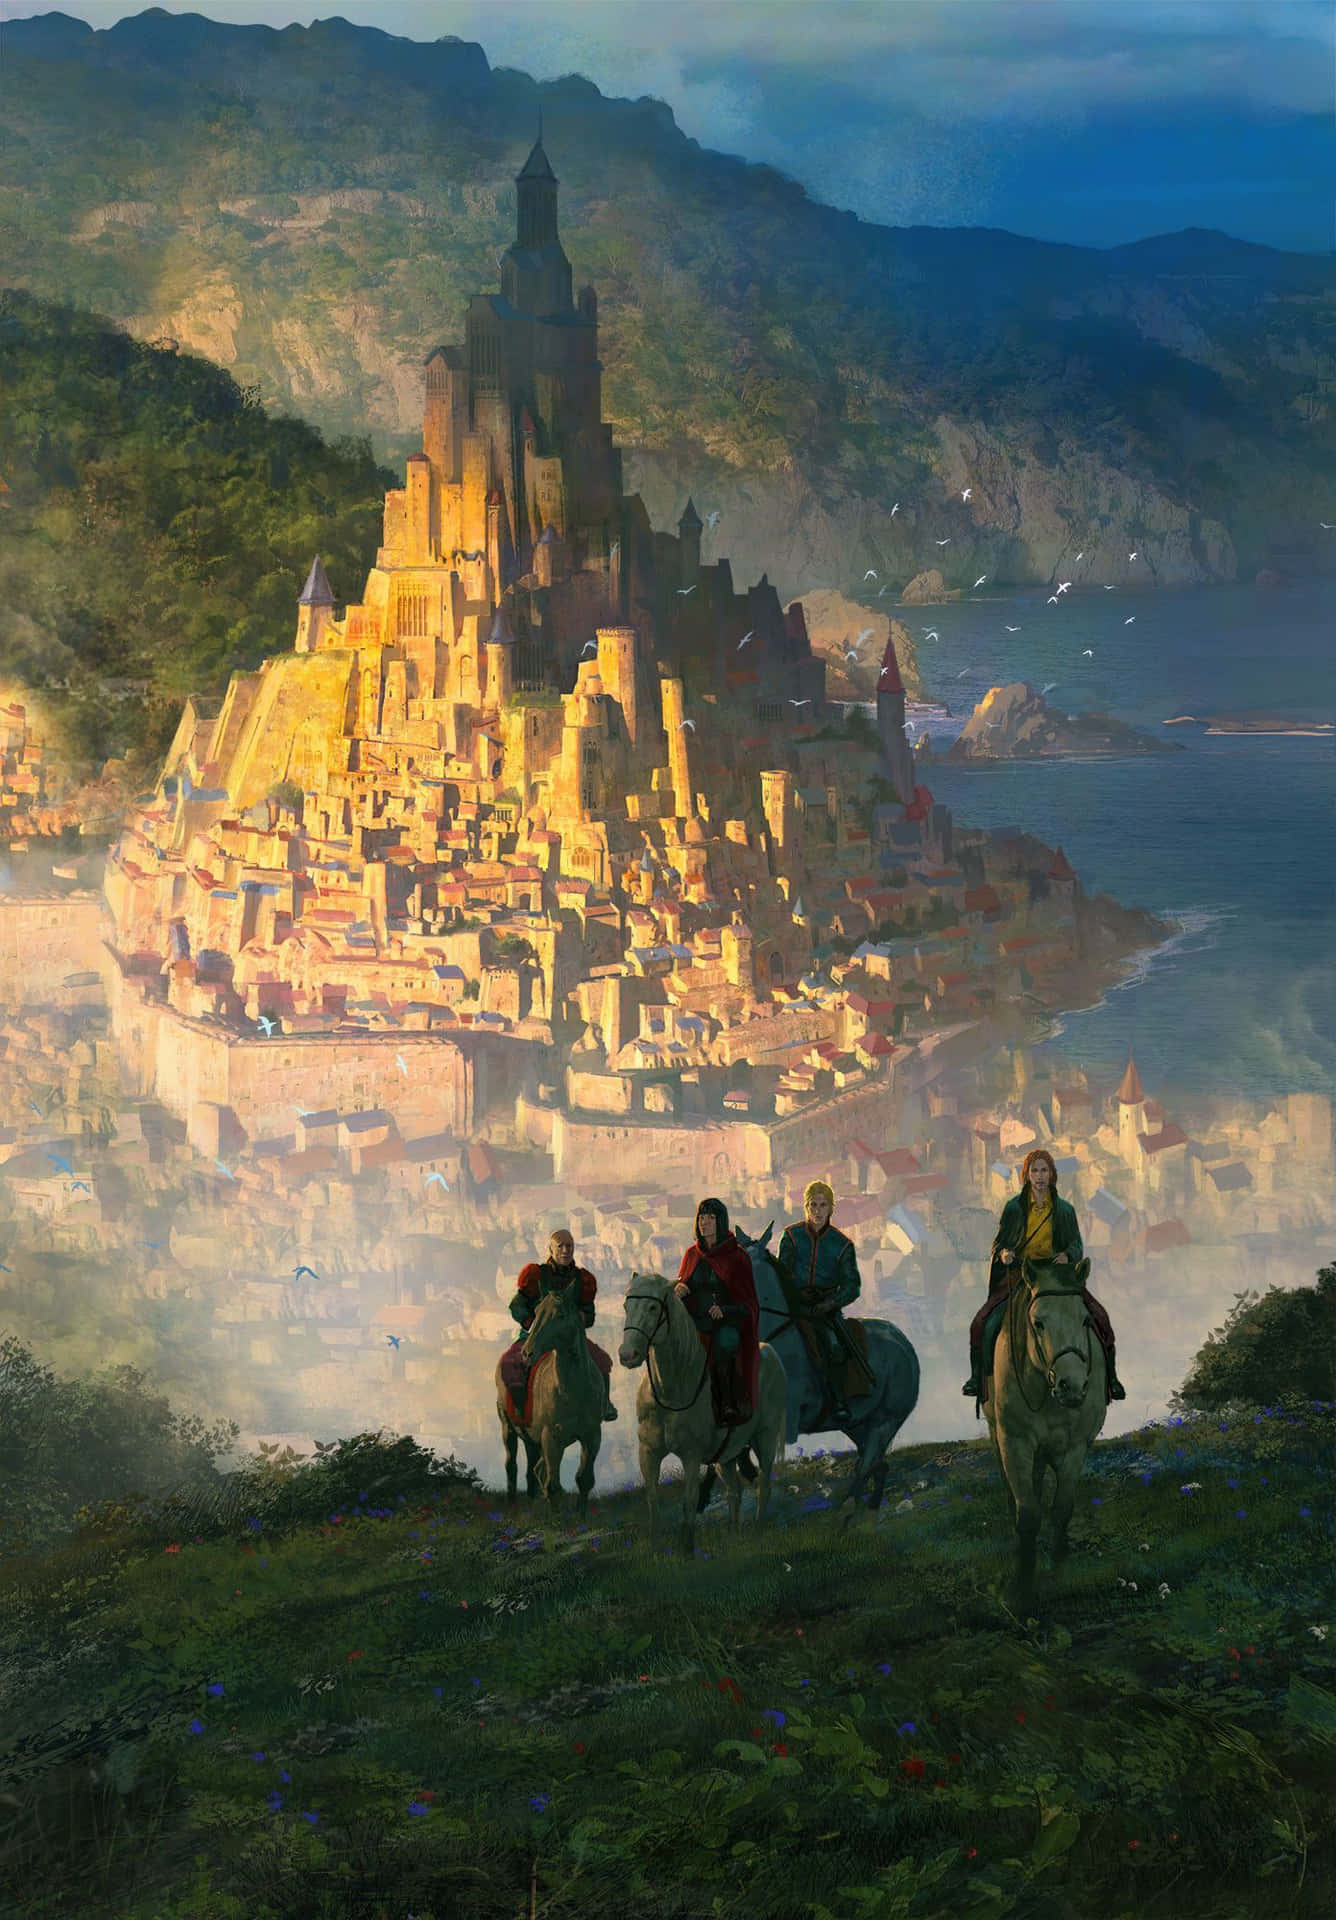 A Painting Of A Castle With People On Horses